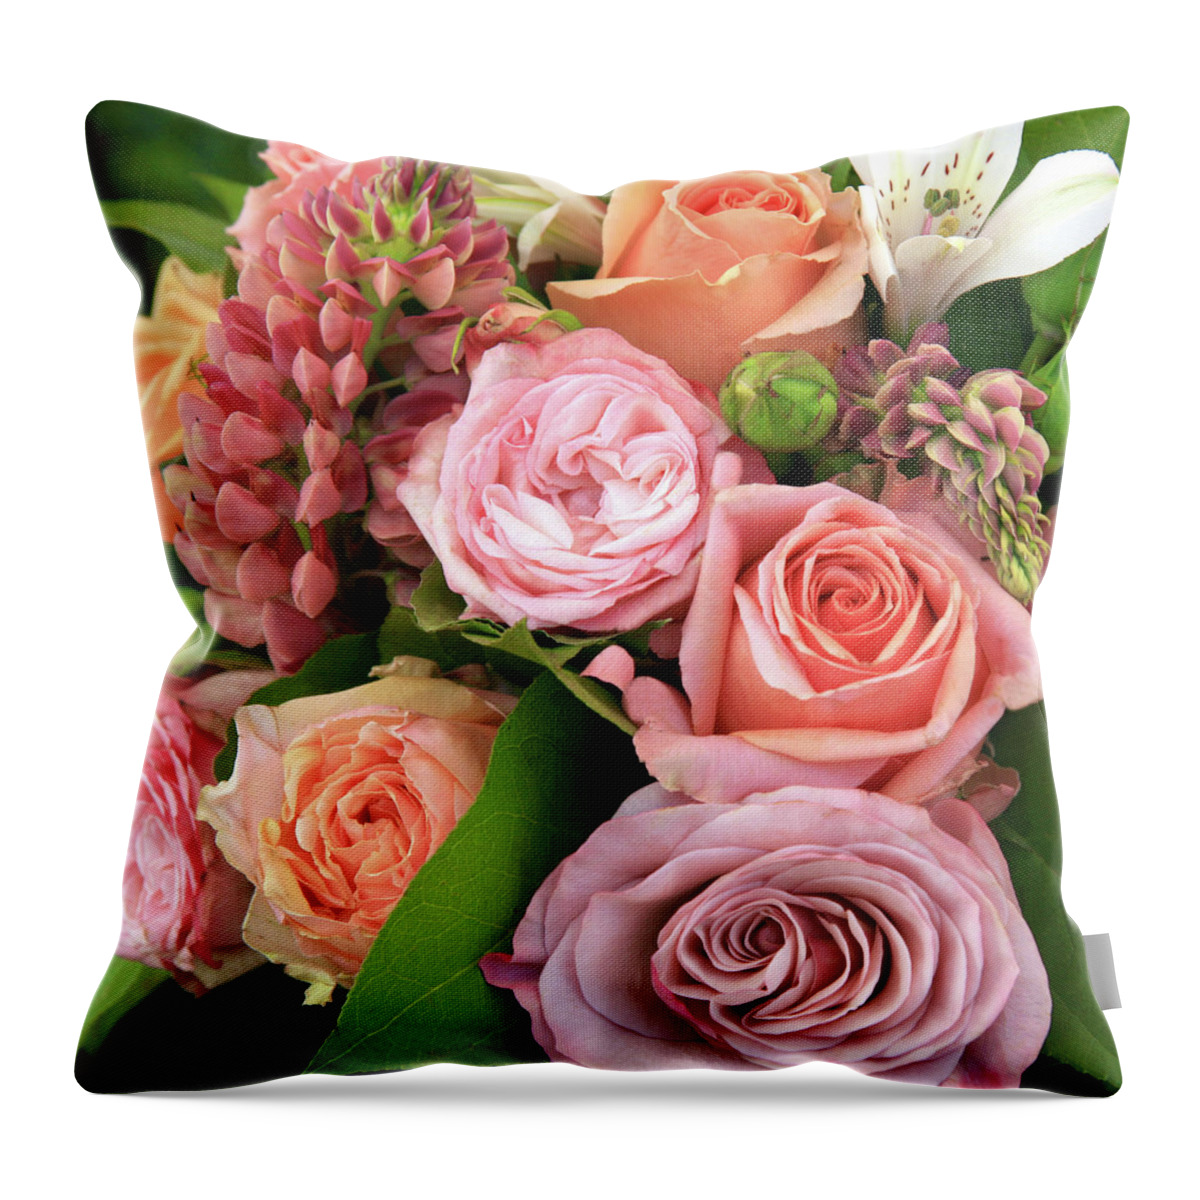 Large Group Of Objects Throw Pillow featuring the photograph Beautiful Bouquet Of Flowers In Soft by Lubilub